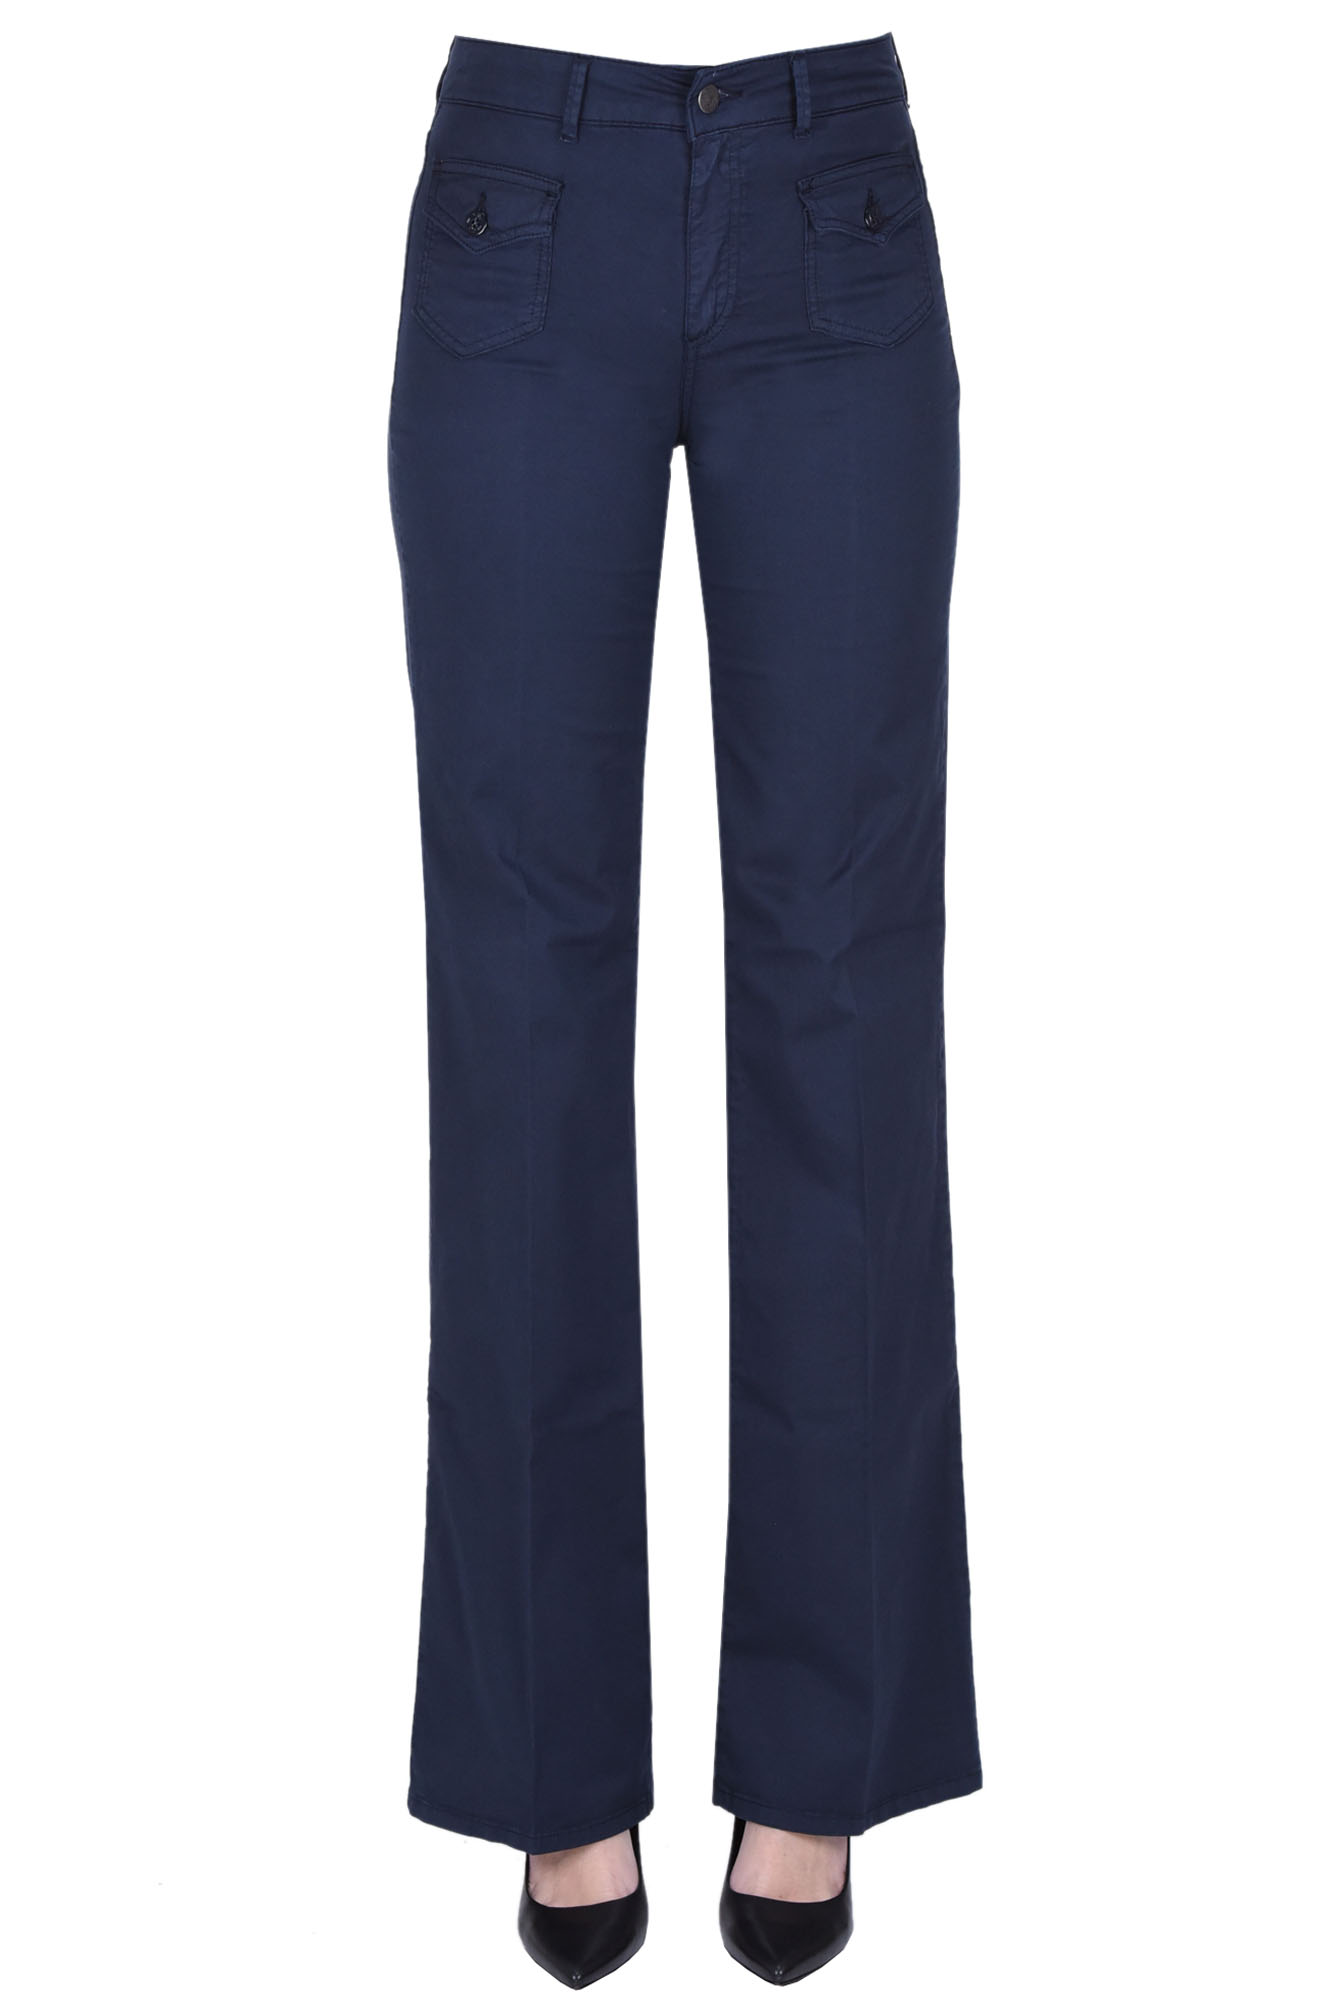 Shop Cigala's Chino Trousers In Navy Blue